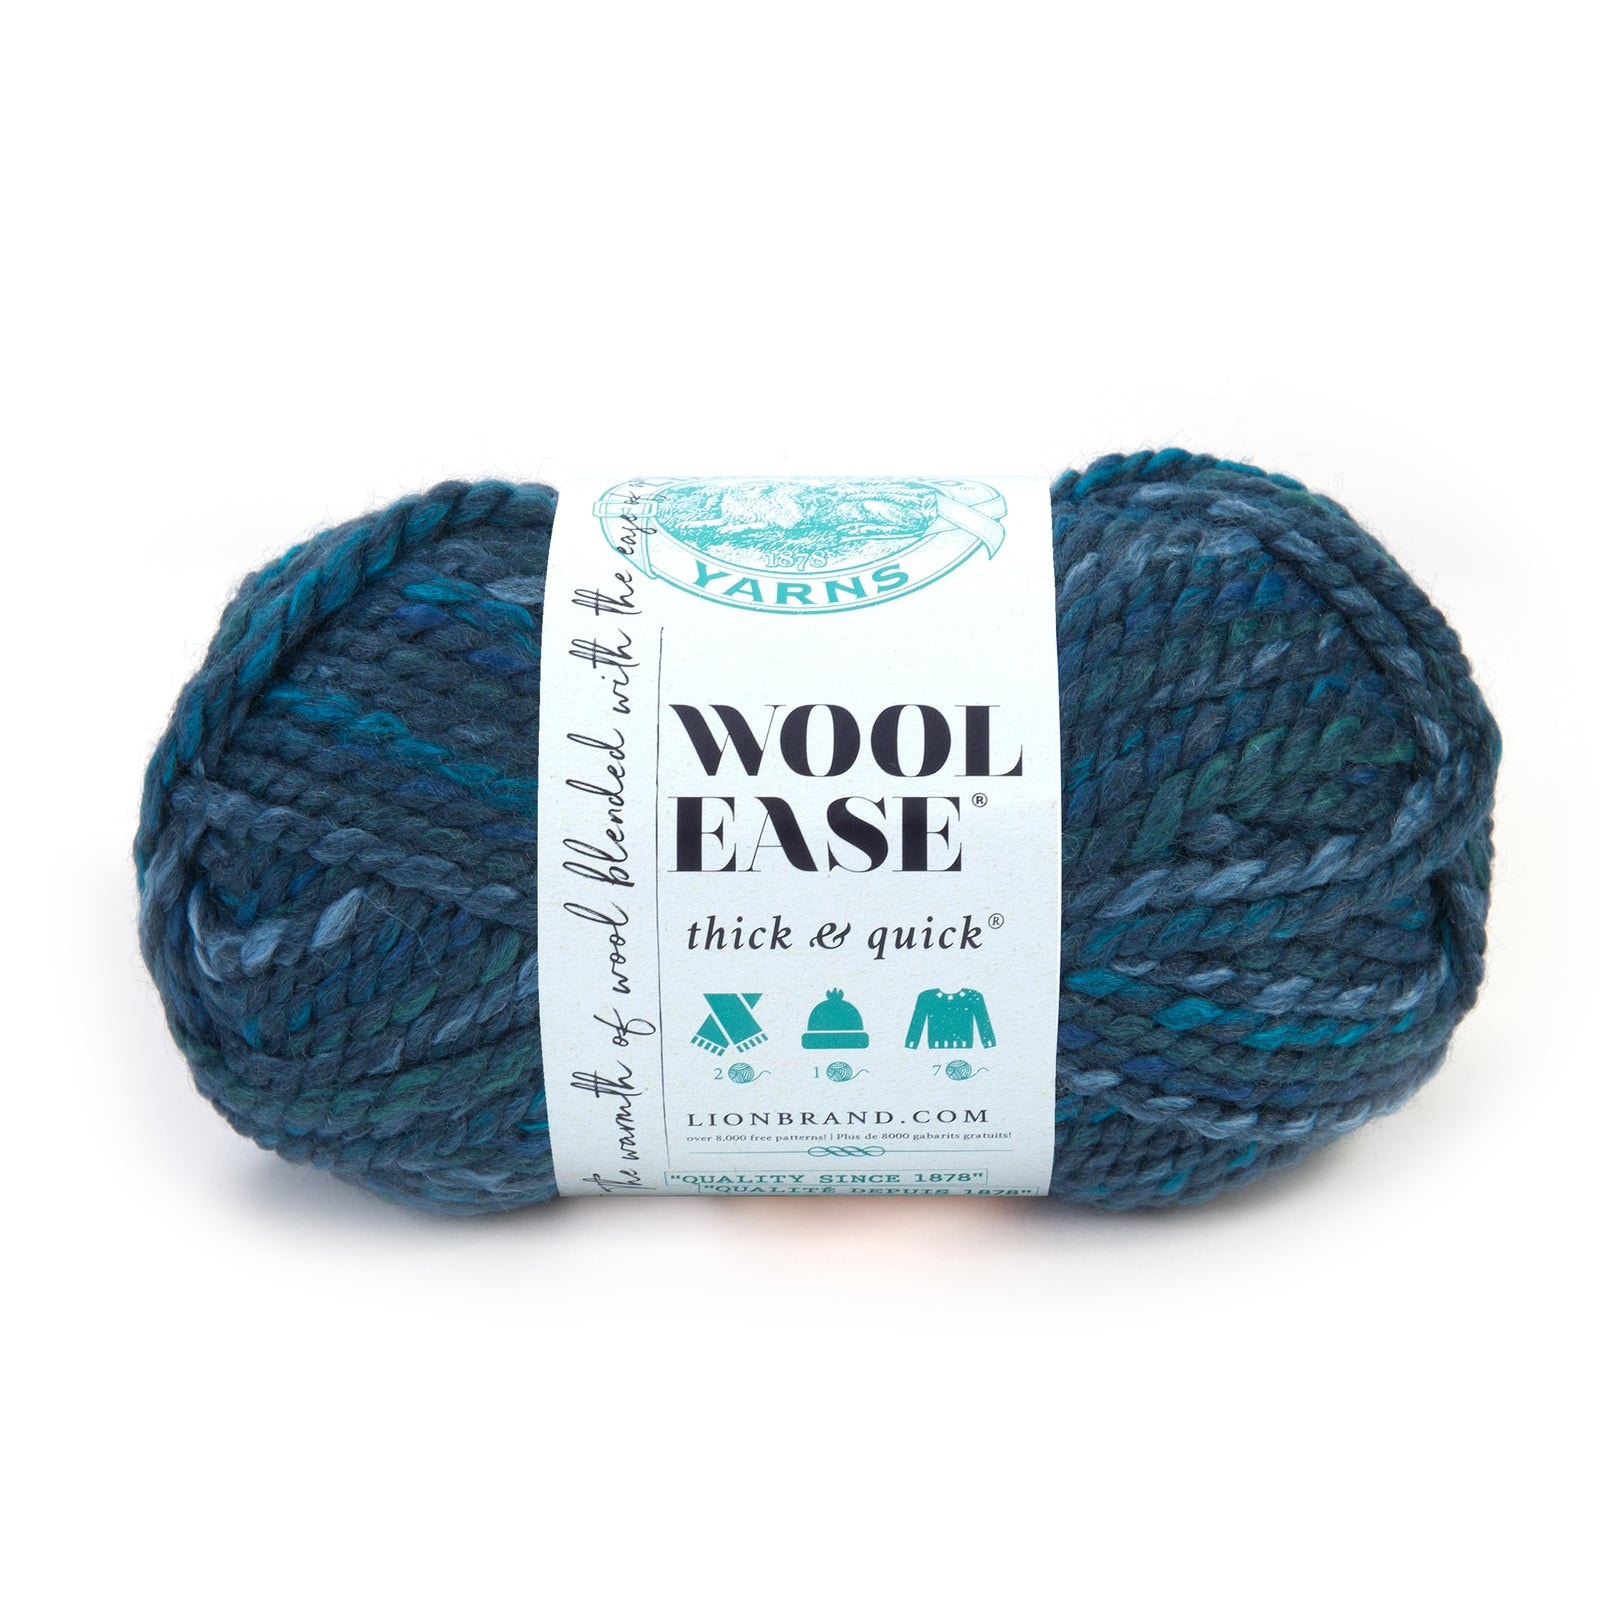 DUSK Blue Green Lion Brand Wool-ease Thick & Quick Yarn Wt 6 Super